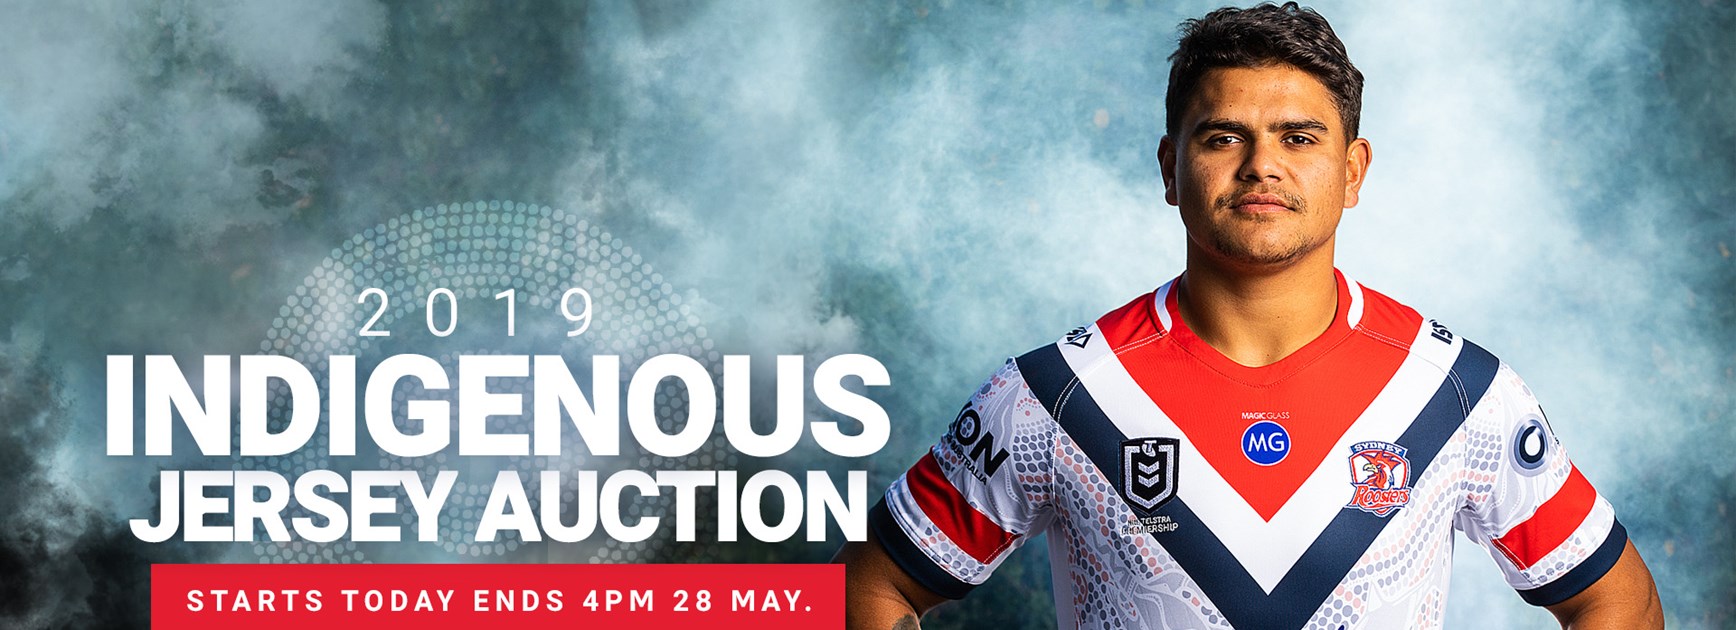 Player Issued And Signed 2019 Indigenous Jersey